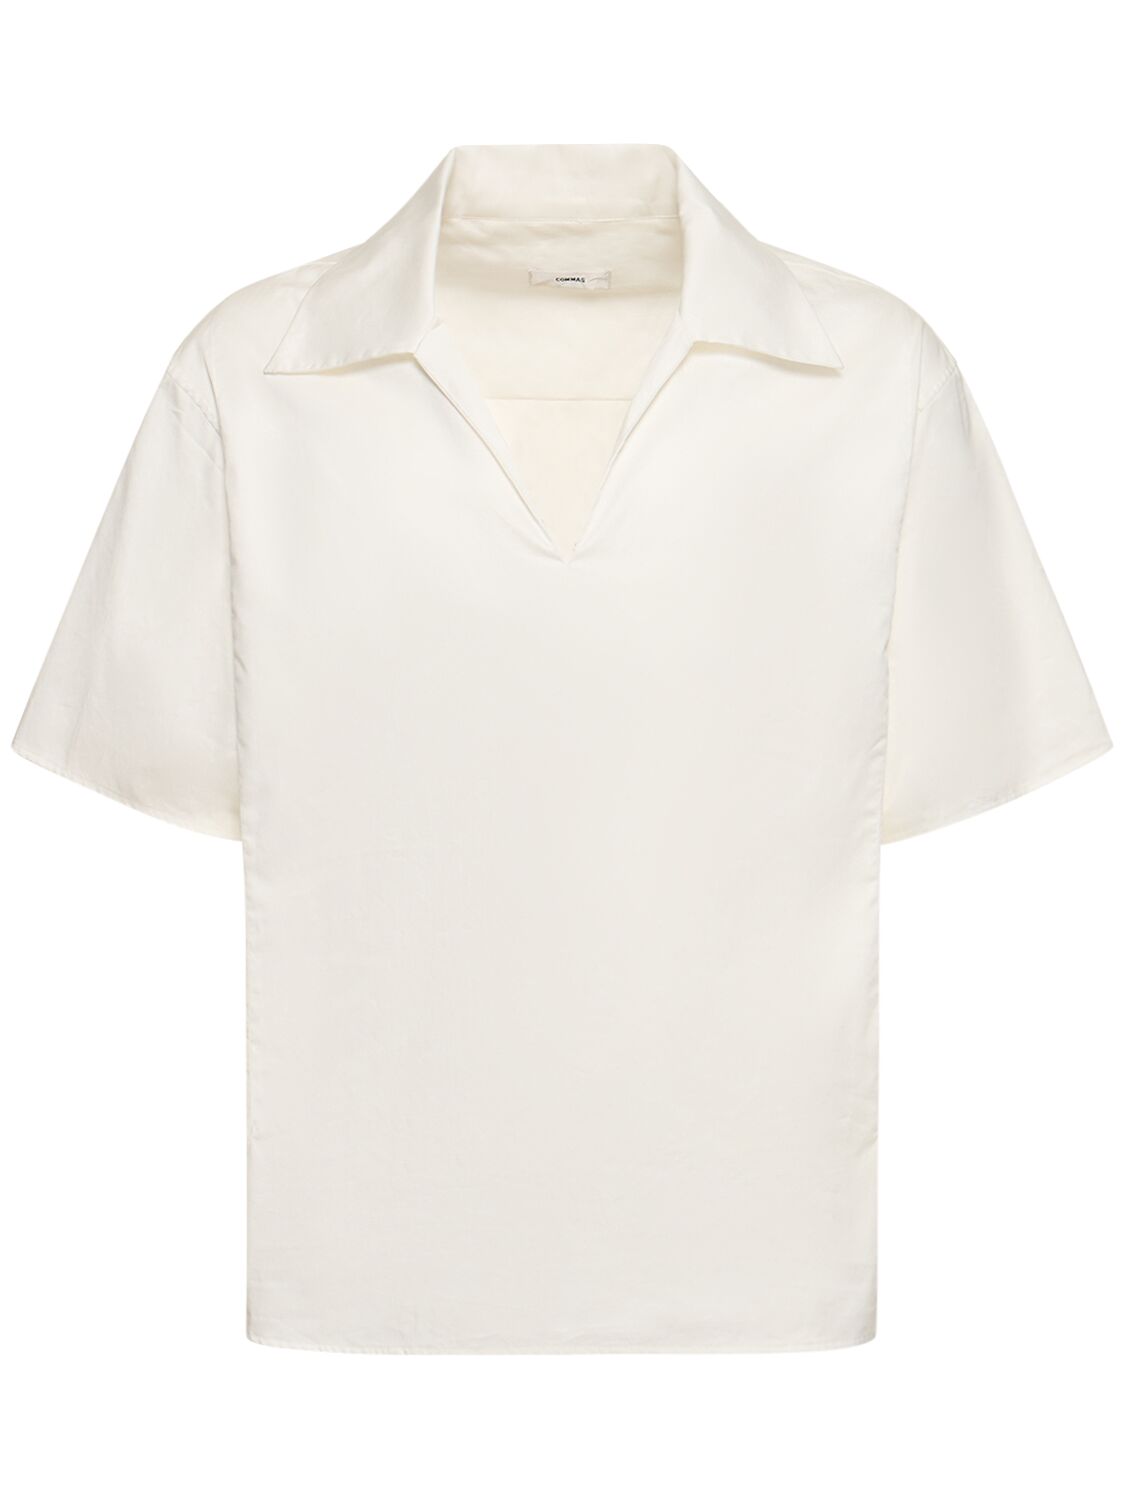 Image of Spread Collar S/s Boxy Fit Shirt